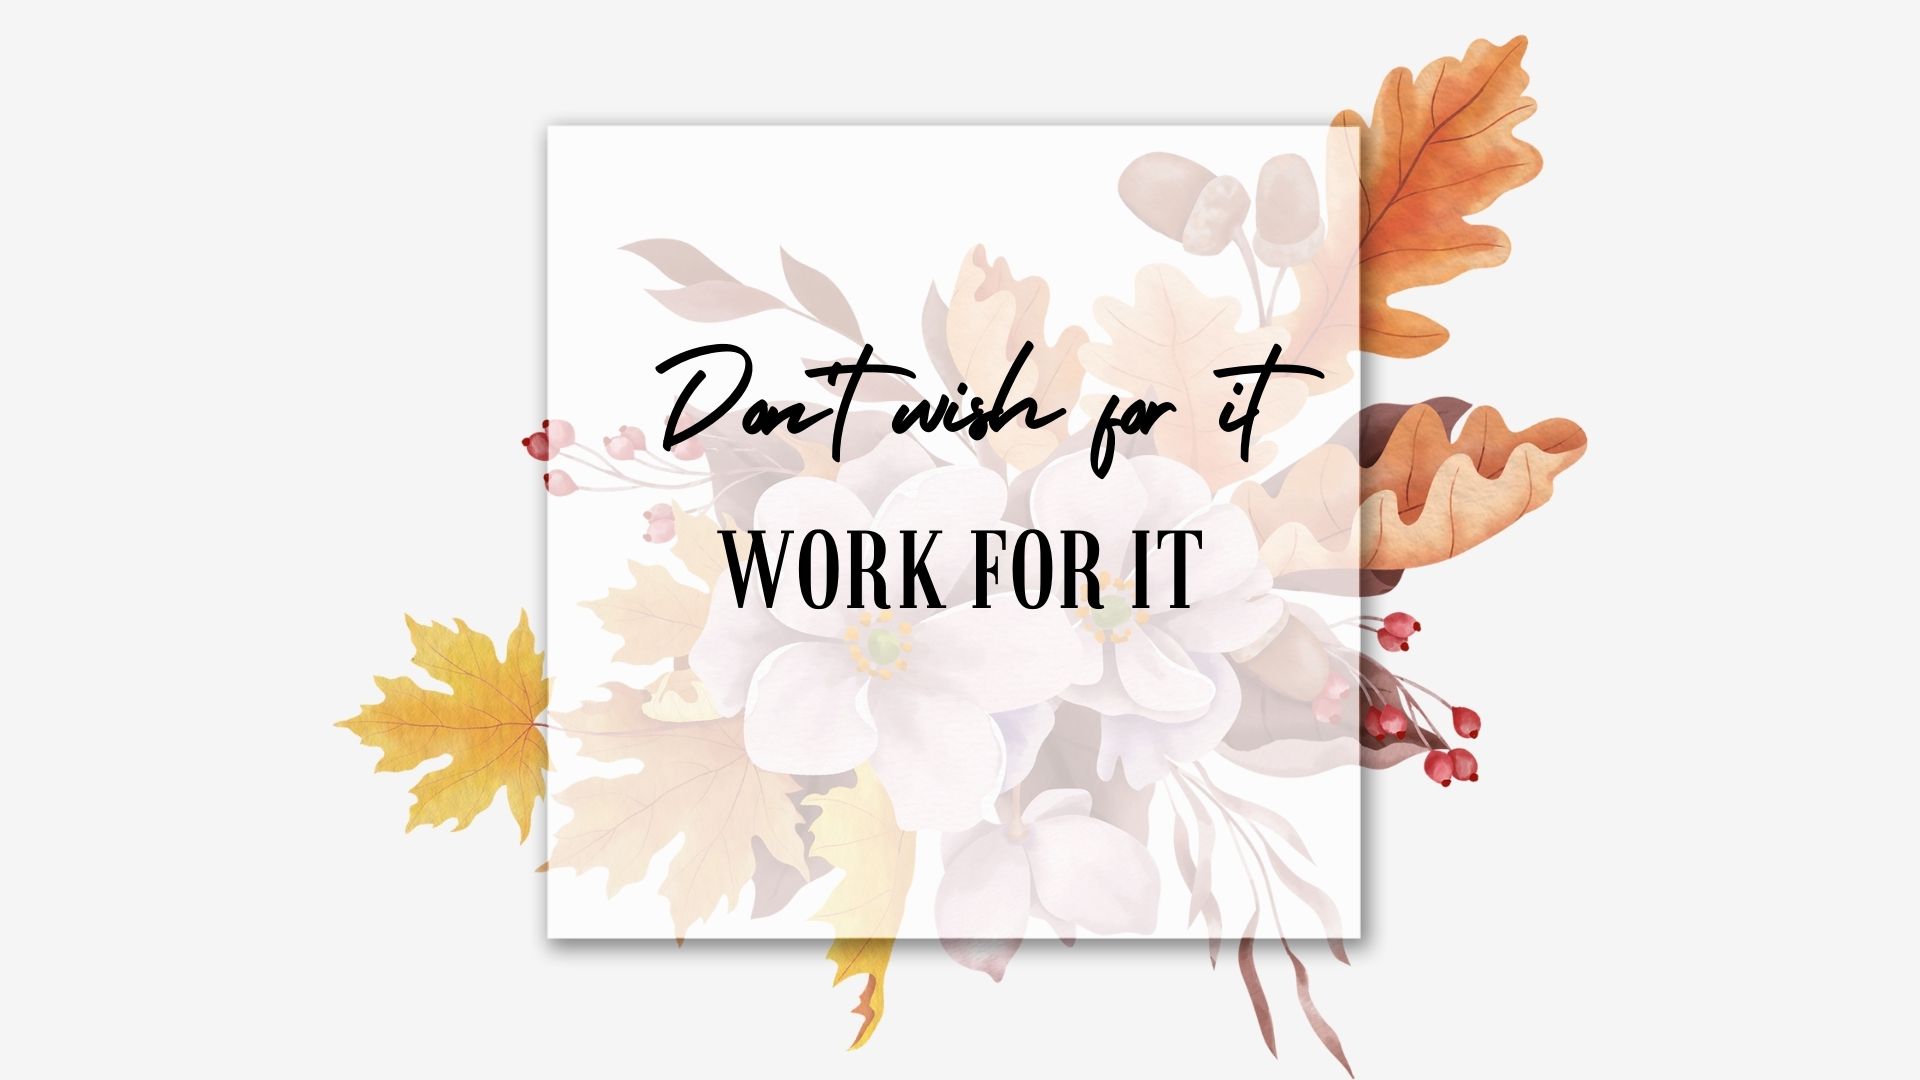 September desktop wallpapers with quotes